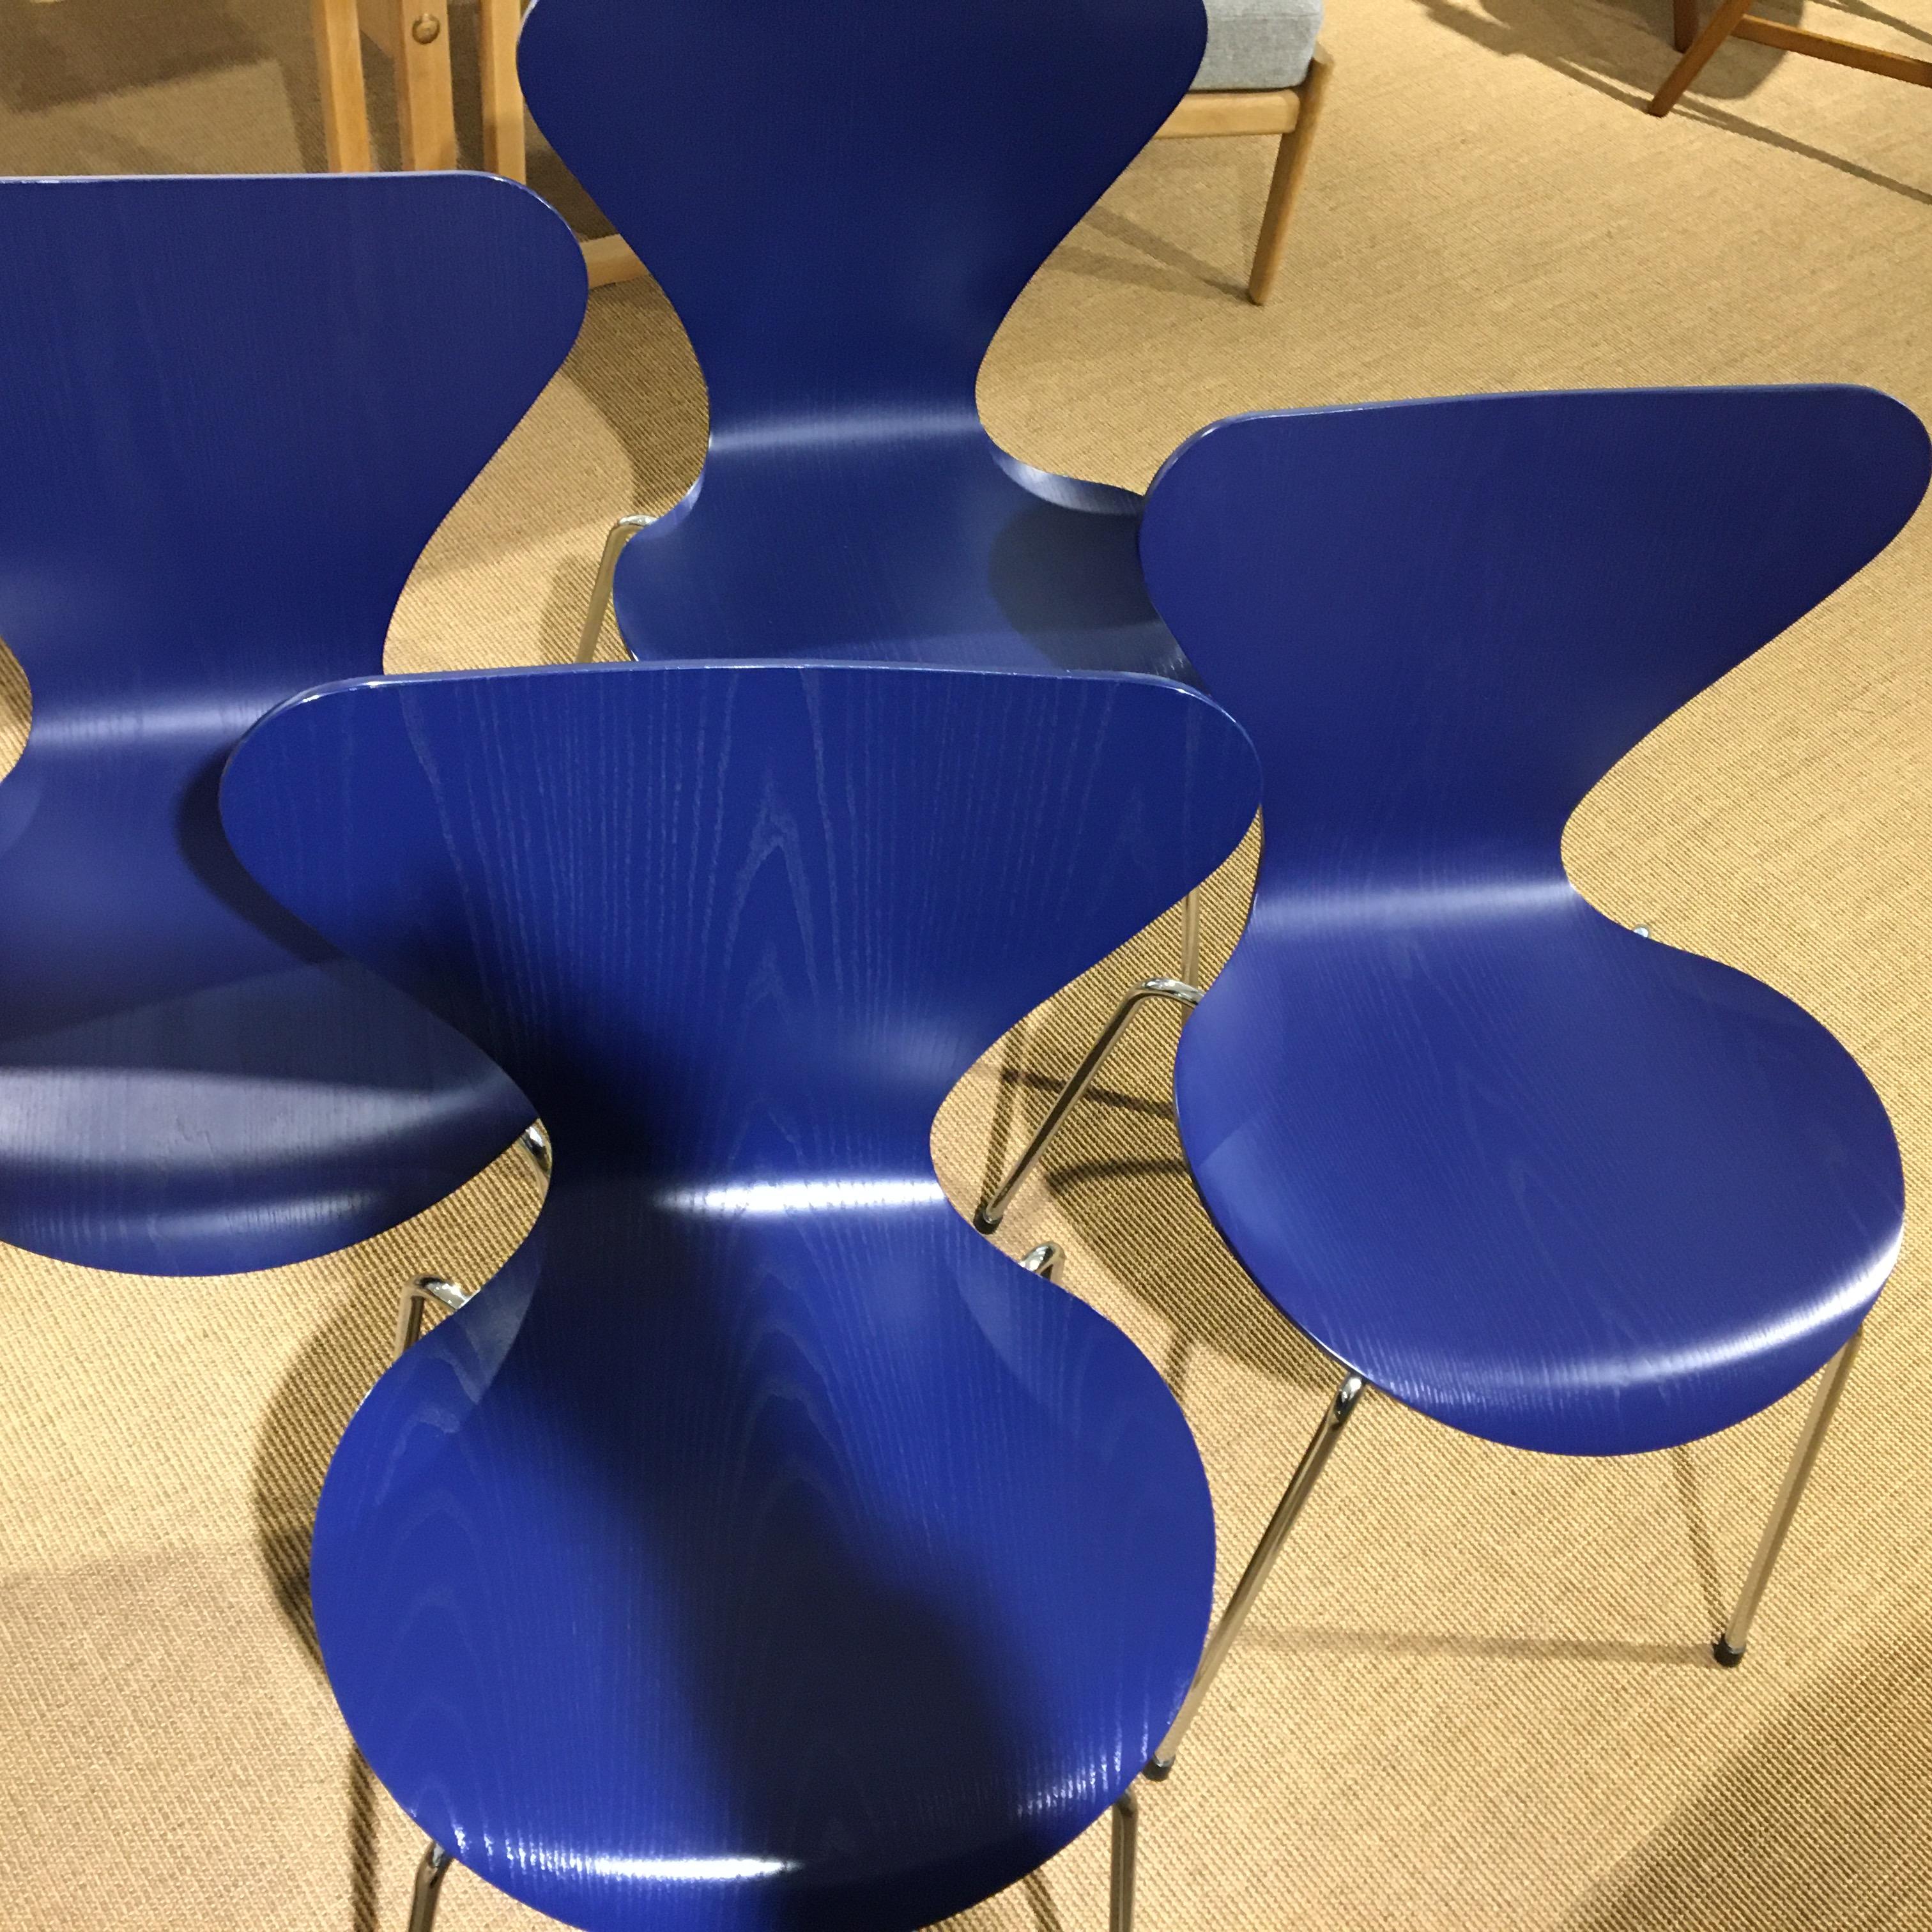 Arne Jacobsen Dining Chairs 4 Pcs, Aj 3107 in Blue In Good Condition In Odense, Denmark